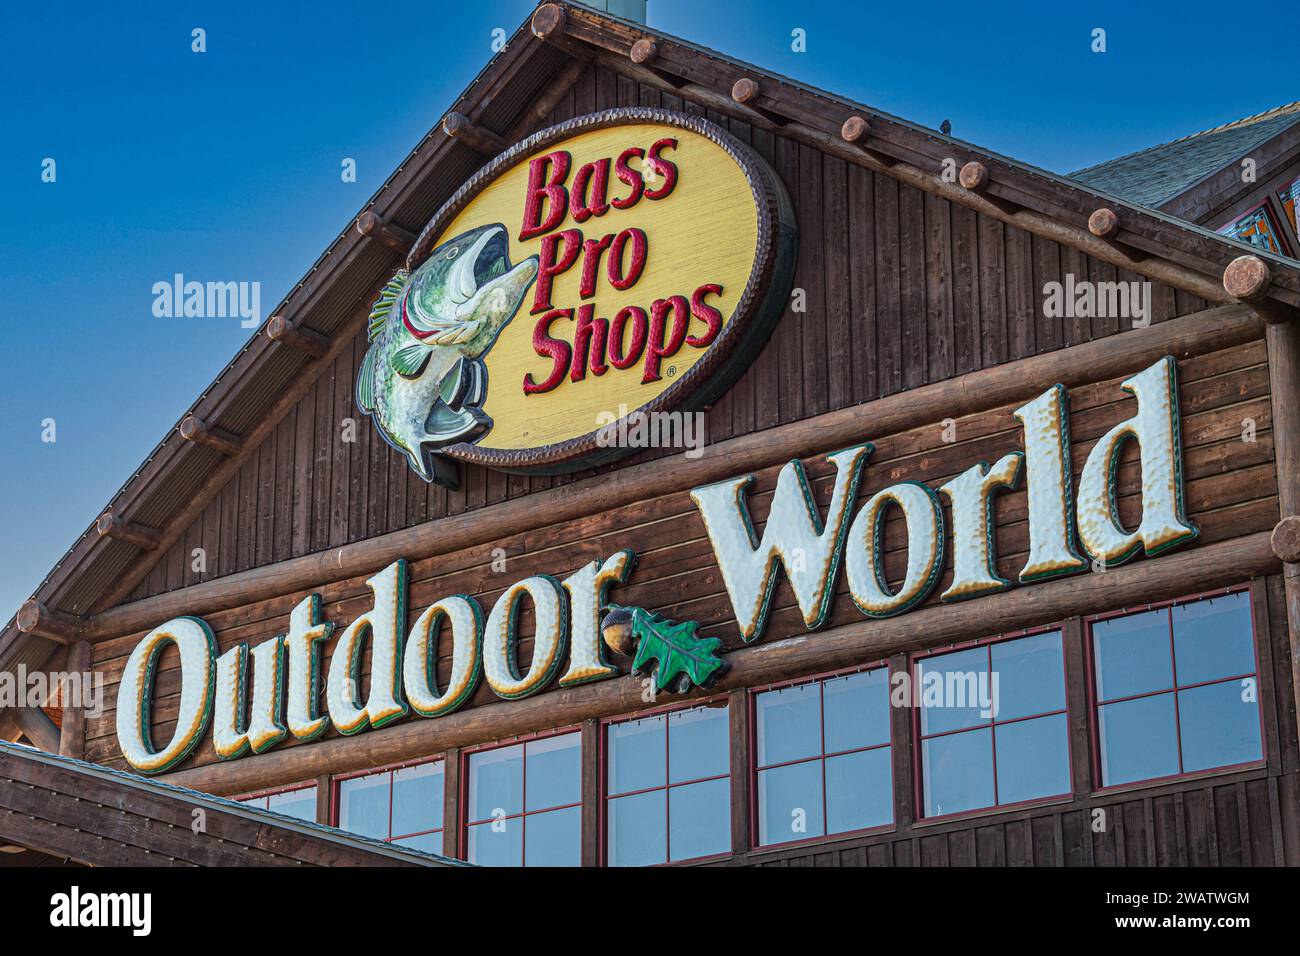 Rancho Cucamonga, CA - Dec 25, 2023: Bass Pro Shops is one of the most exciting outdoor hunting & fishing & adventure shopping experiences in America. Stock Photo